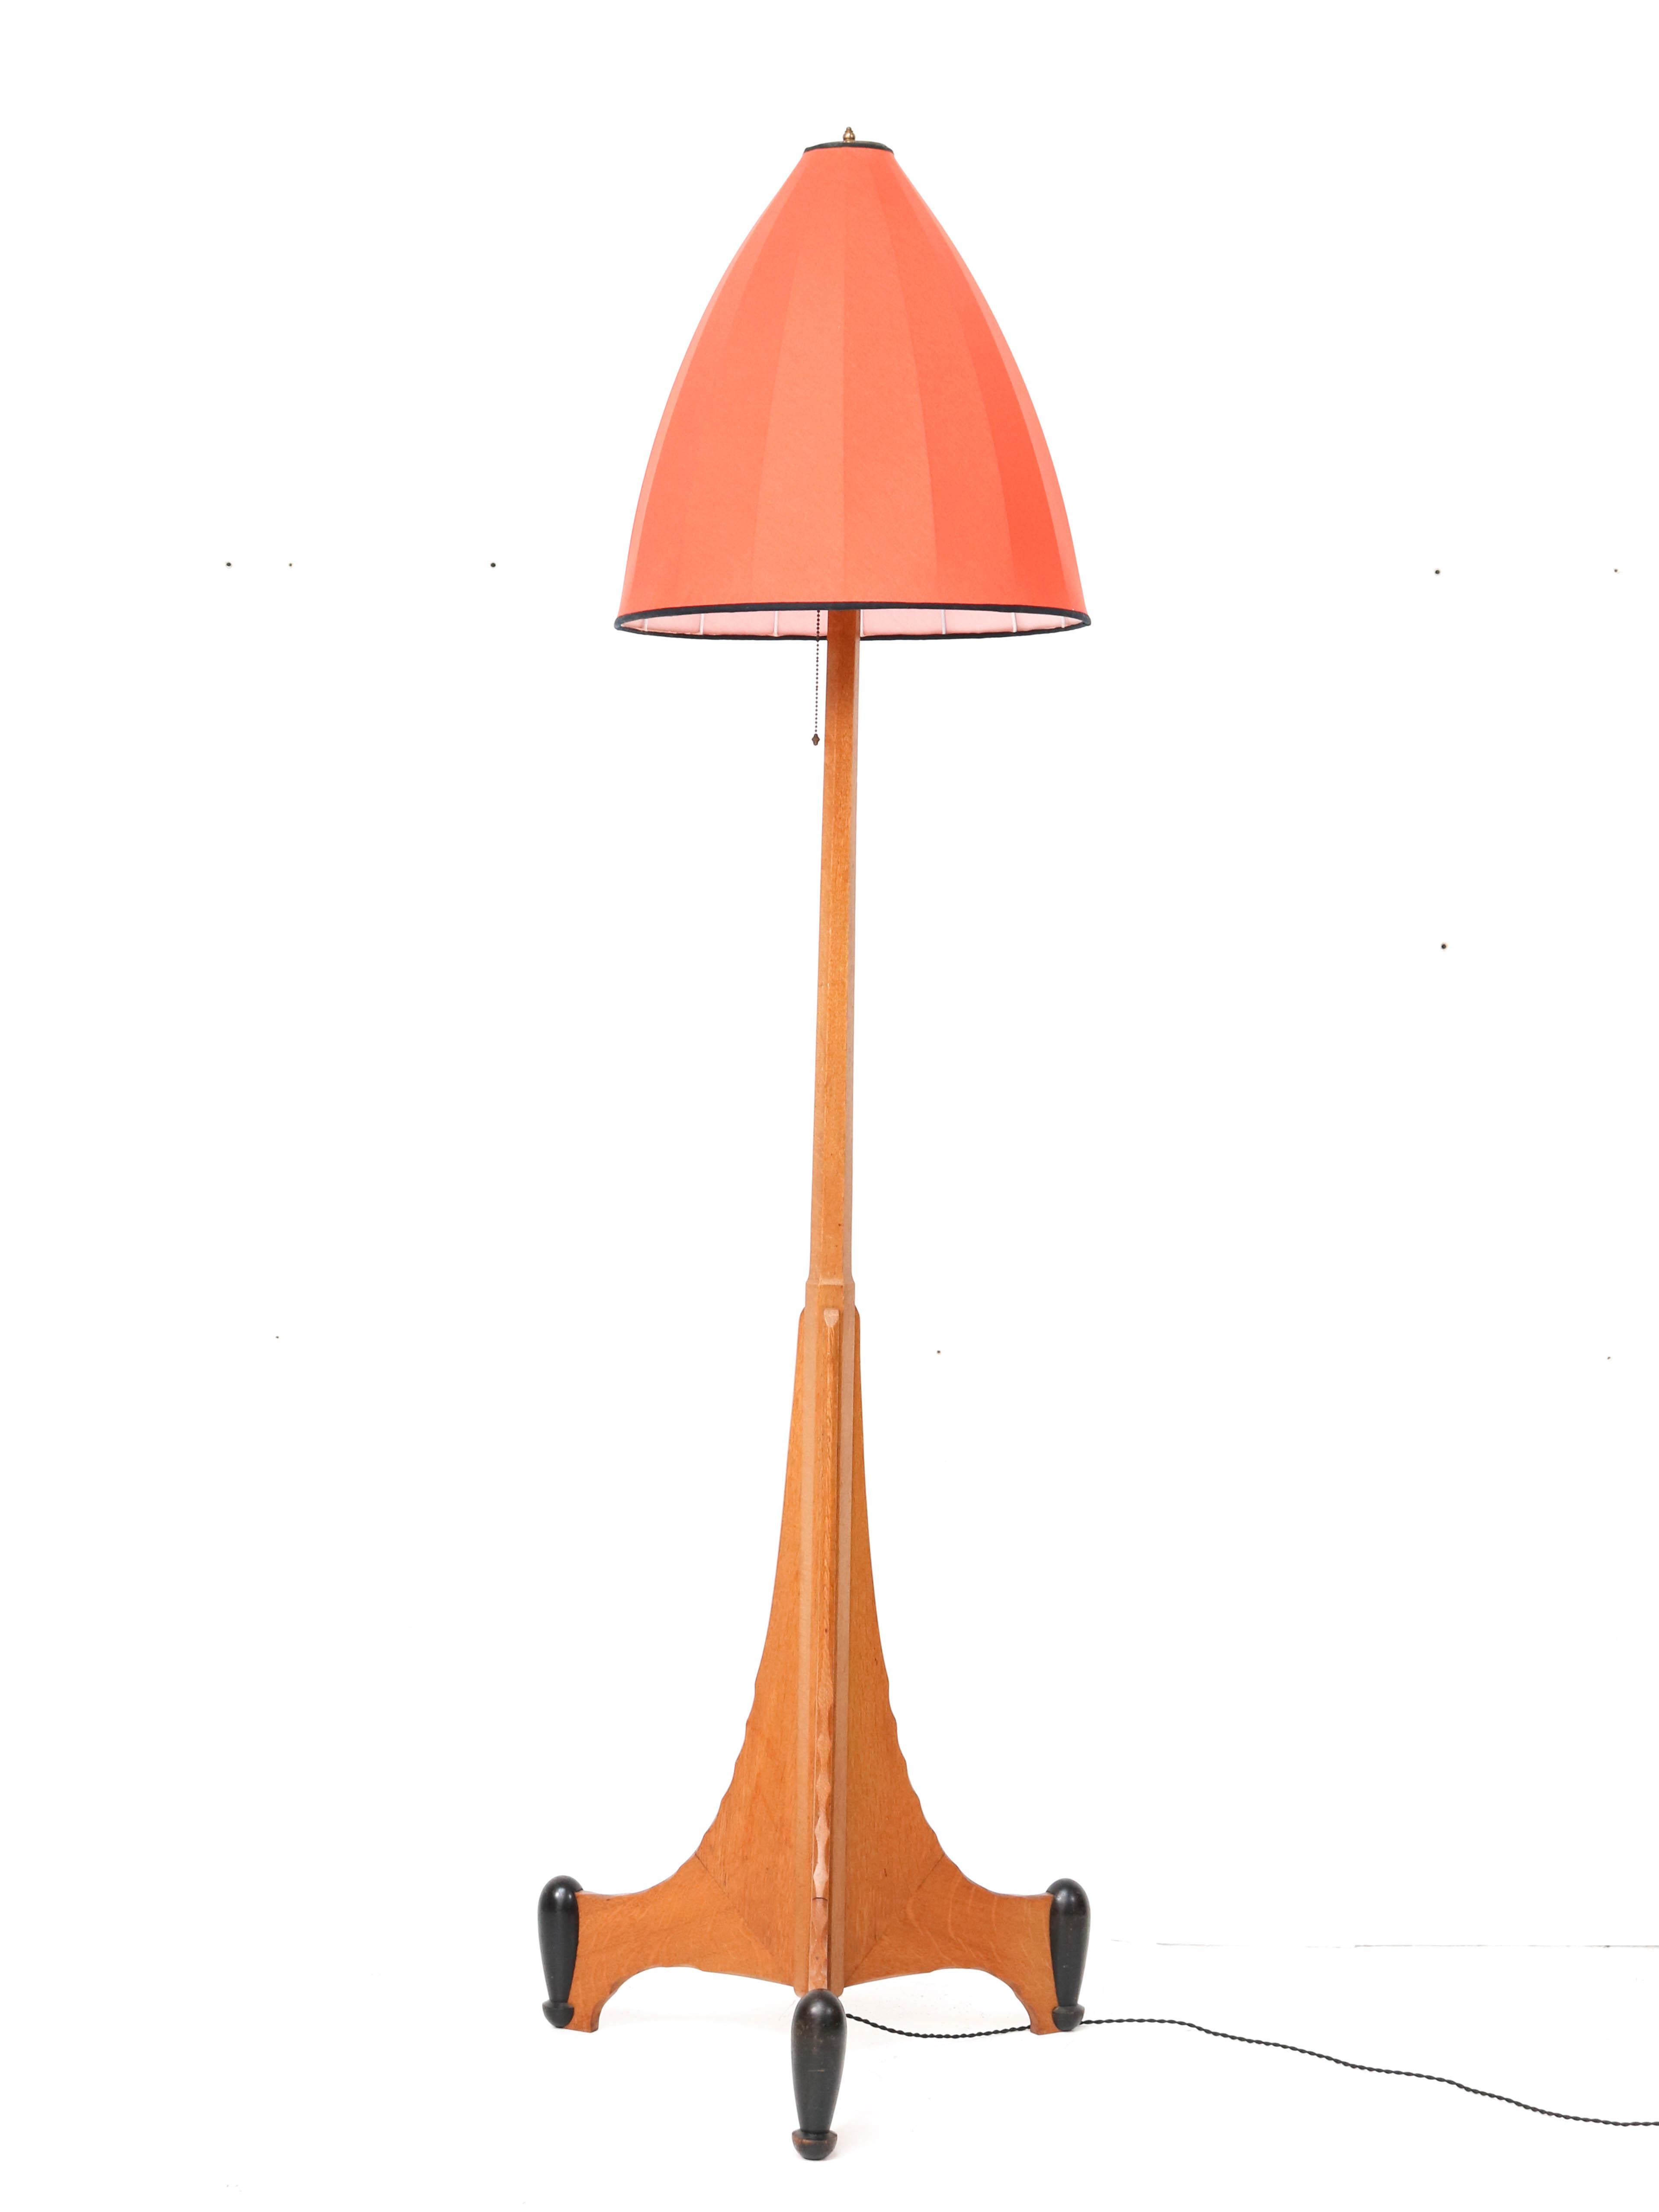 Stunning and rare Art Deco Amsterdam School floor lamp.
Design by C.H. Eckhart Rotterdam.
Striking Dutch design from the 1920s.
Solid oak base with re-upholstered silk shade.
Rewired with one original socket for E27 light bulb.
In very good